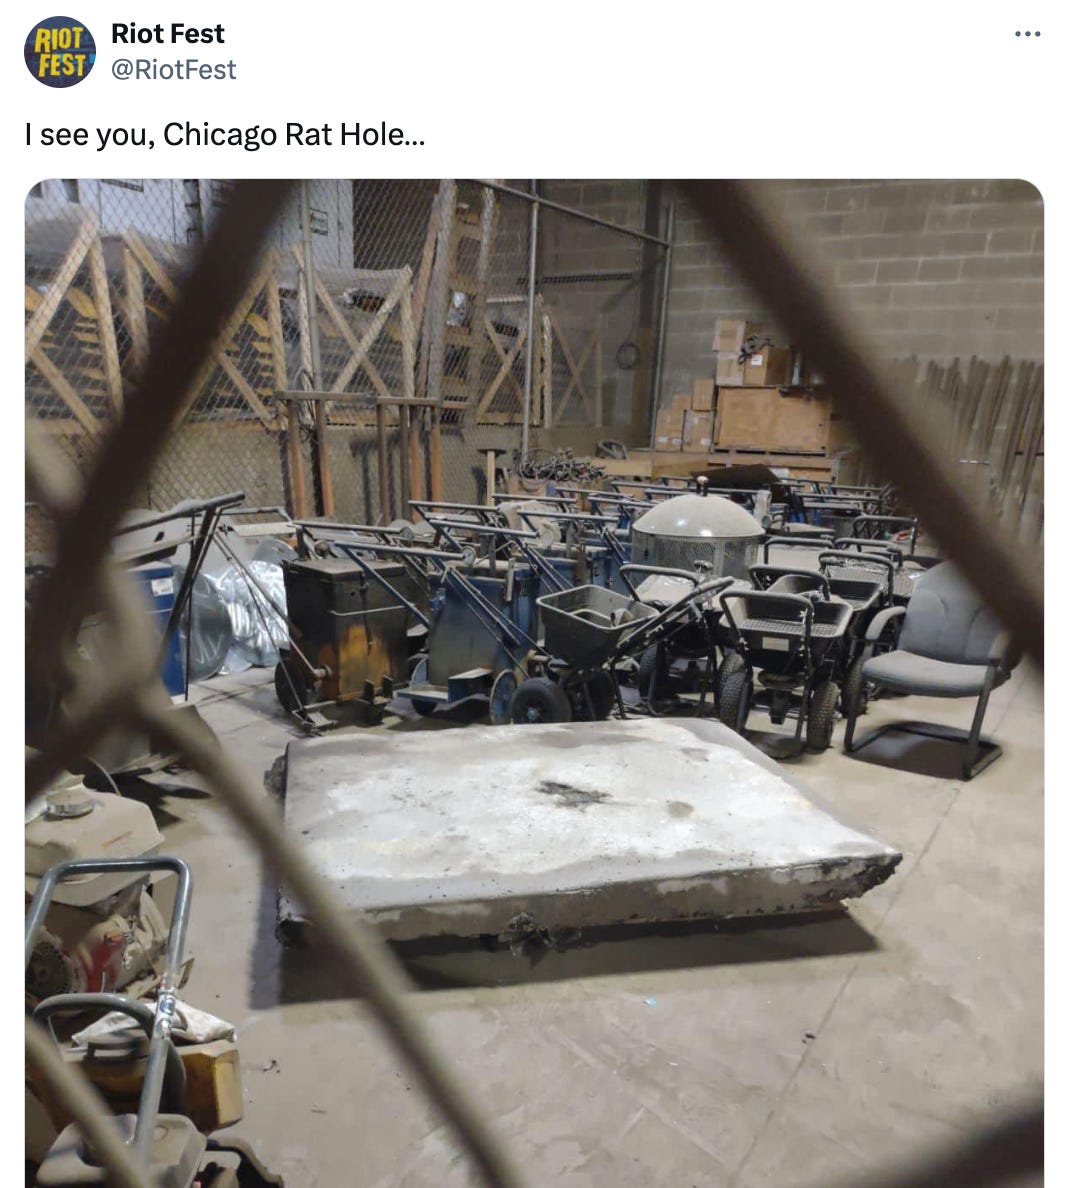 A tweet from @RiotFest that reads "I see you, Chicago Rat Hole..." and features an image taken through a chain-link fence. There's an area with a bunch of yard equipment and old chairs and stuff, and the rat hole slab is just sitting on the ground nearby.